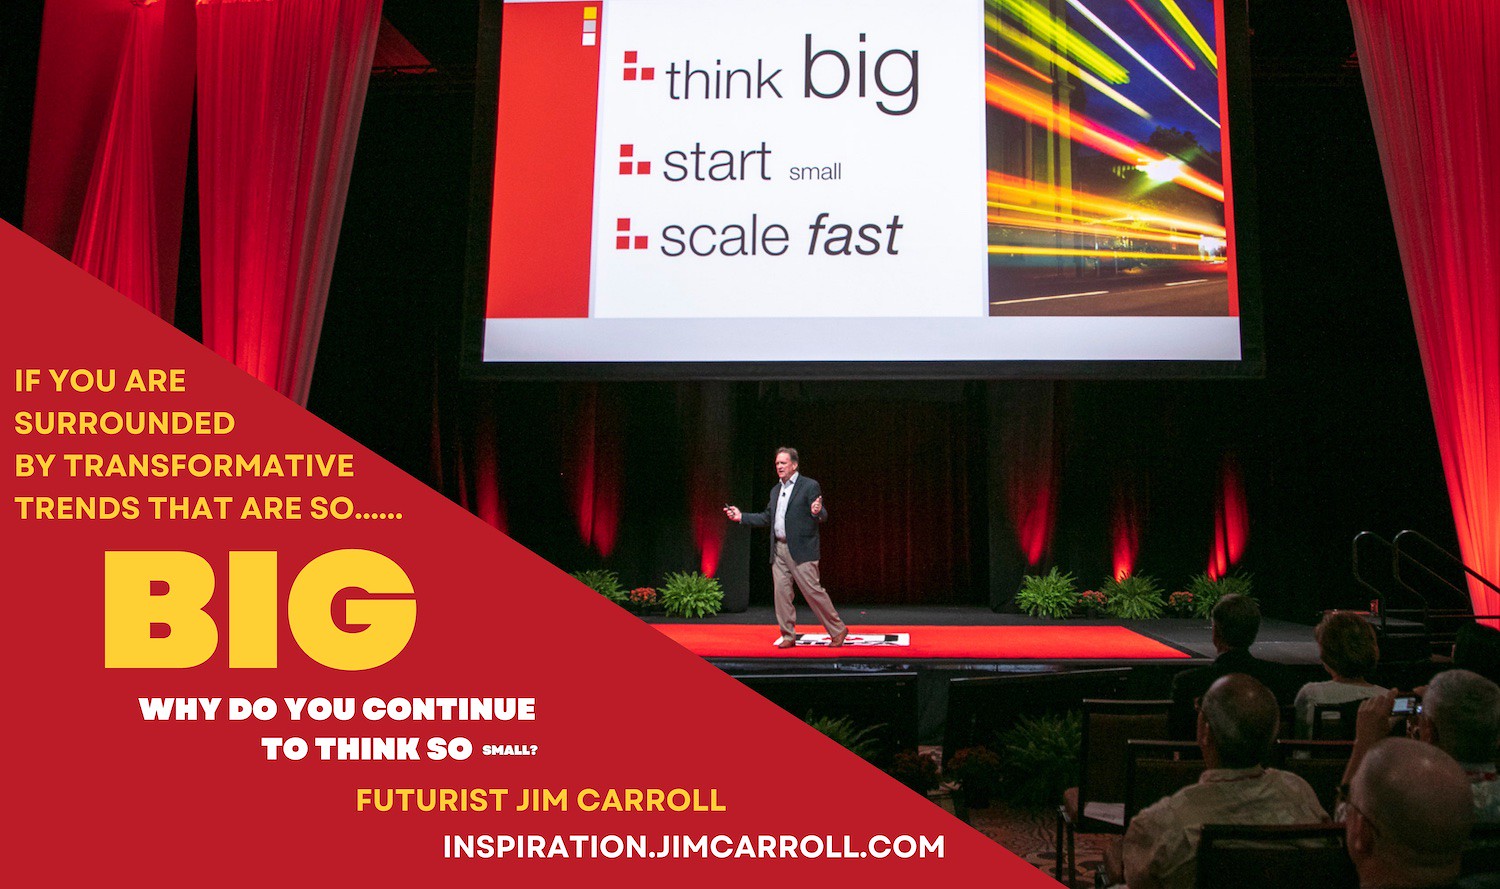 "If you are surrounded by transformative trends that are so big, why do you continue to think so small?" - Futurist Jim Carroll